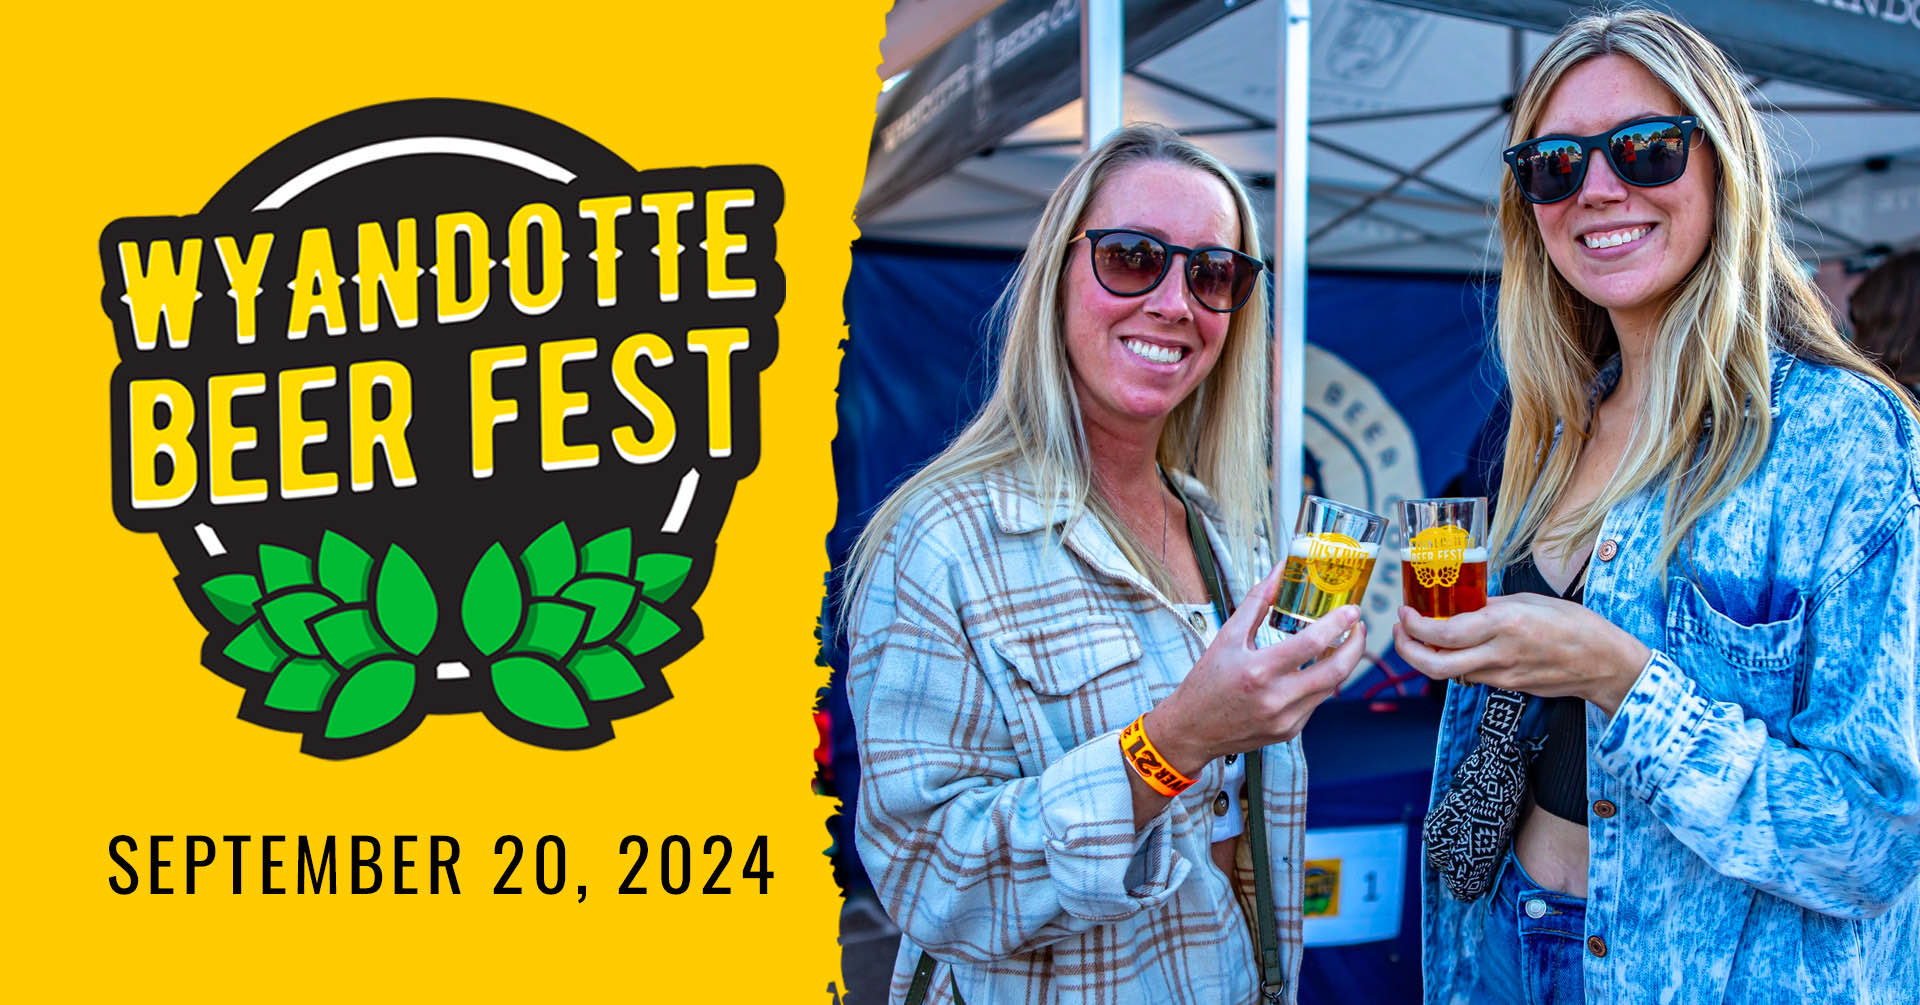 Wyandotte Beer Fest; September 20, 2024; two woman with long blonde hair clinking beer glasses